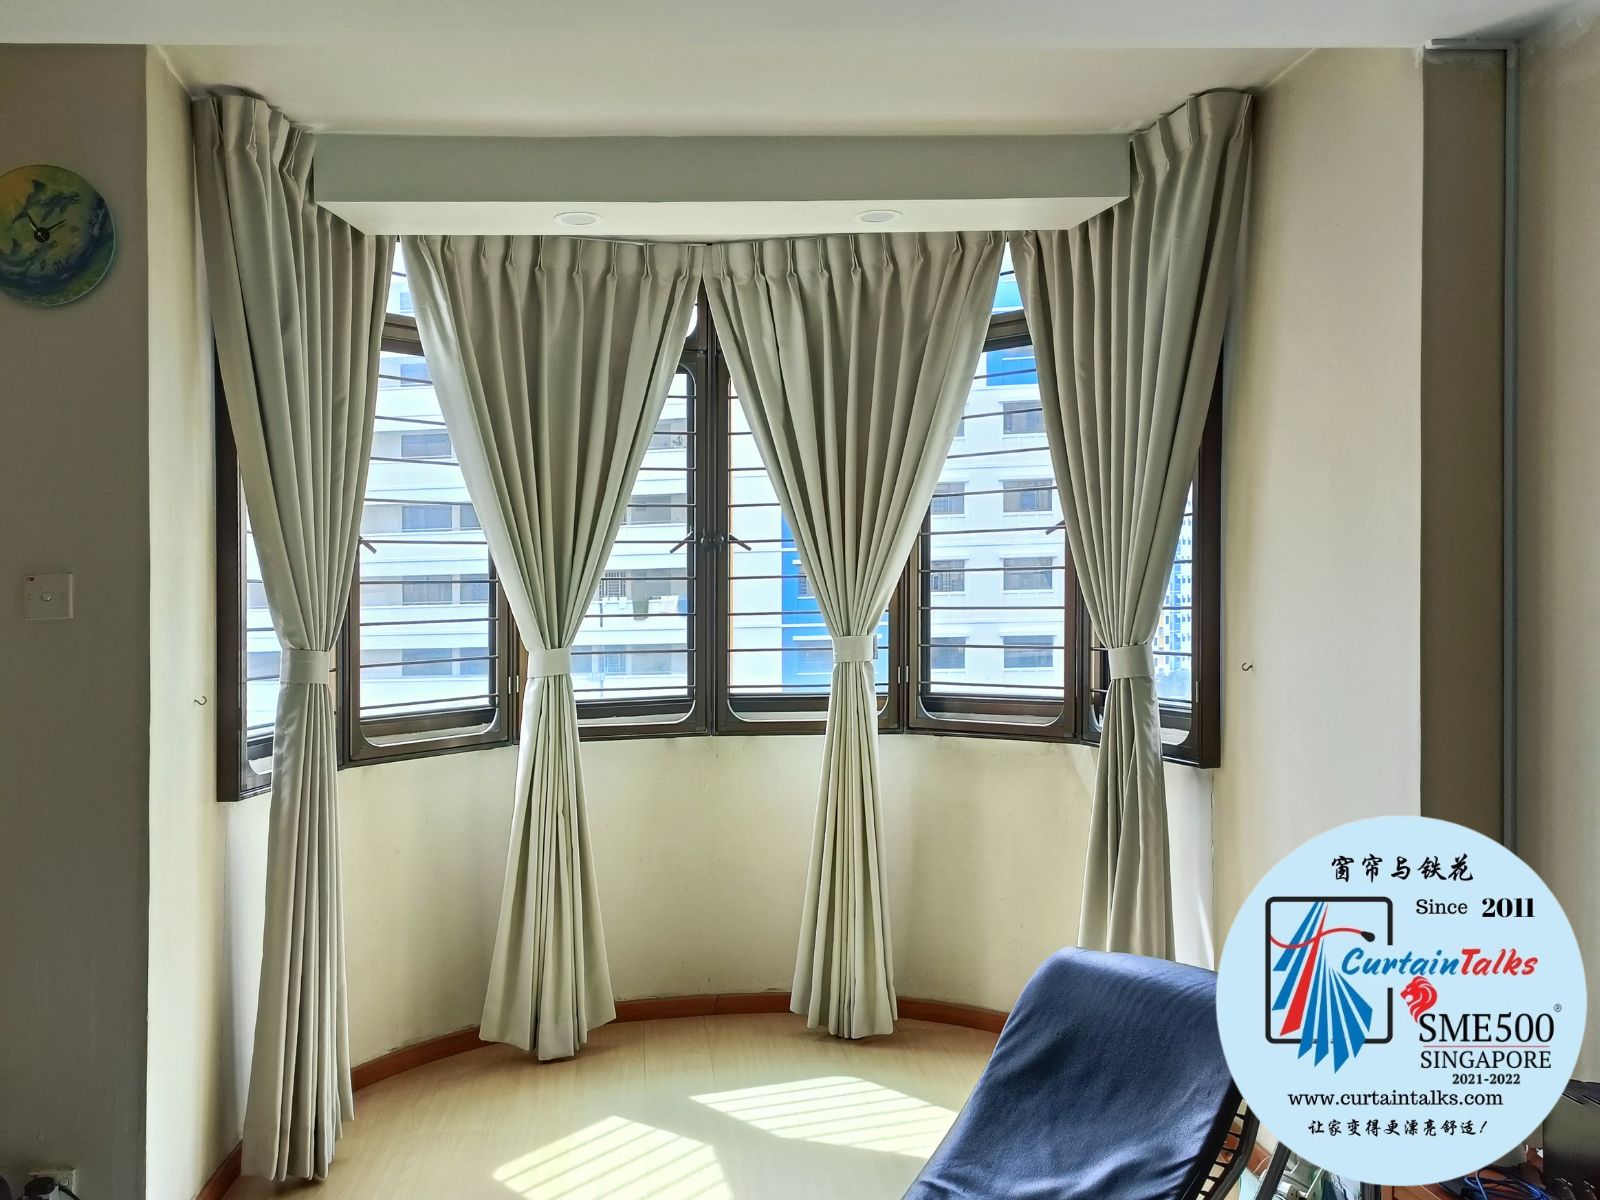 This is a Picture of Day and night curtain picture  for Singapore HDB 4 rooms flat, day and night curtain, 146 Serangoon North Ave 1